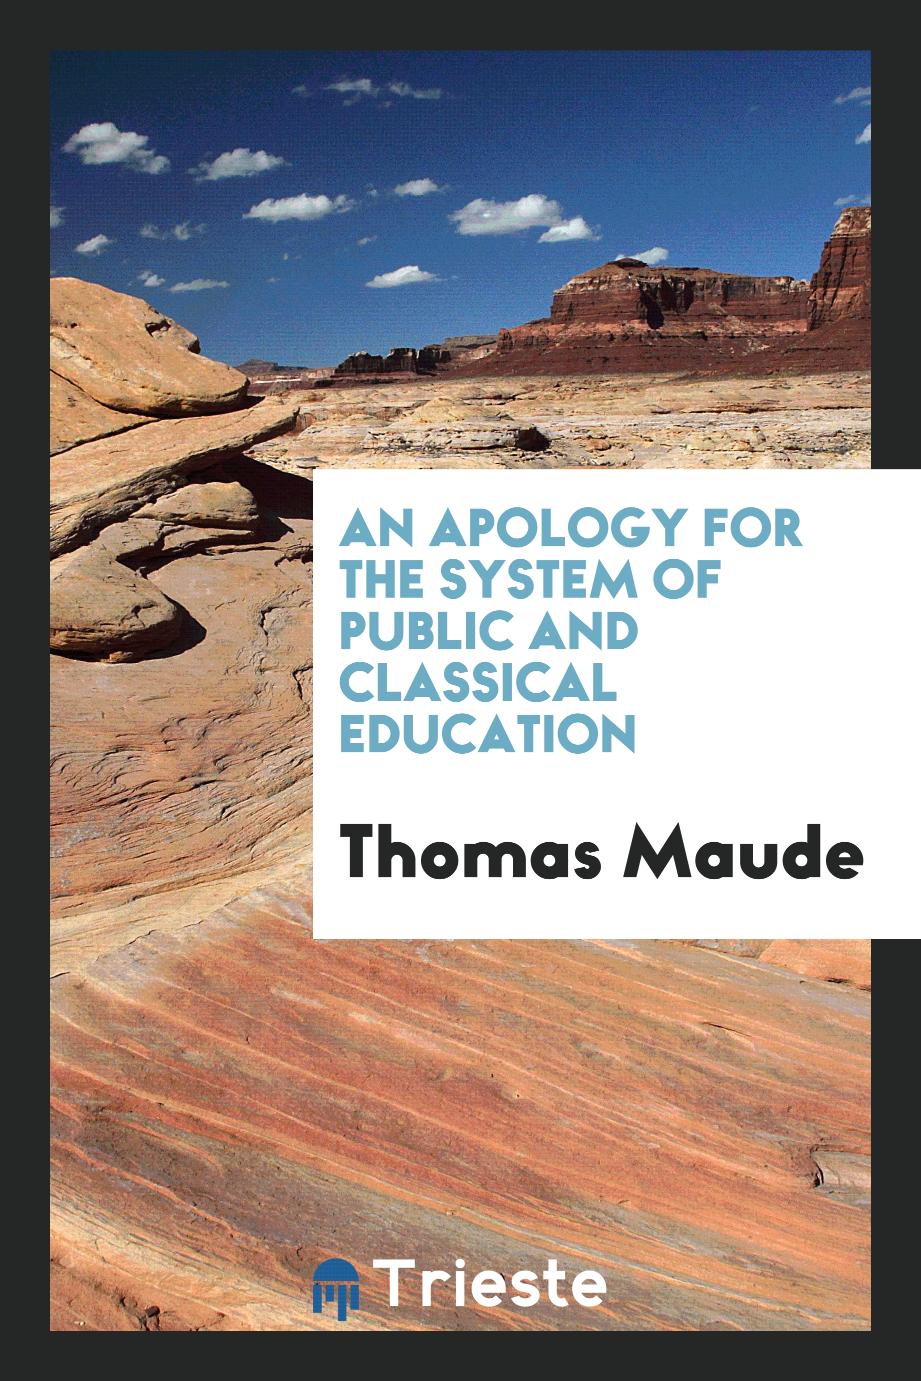 An Apology for the System of Public and Classical Education